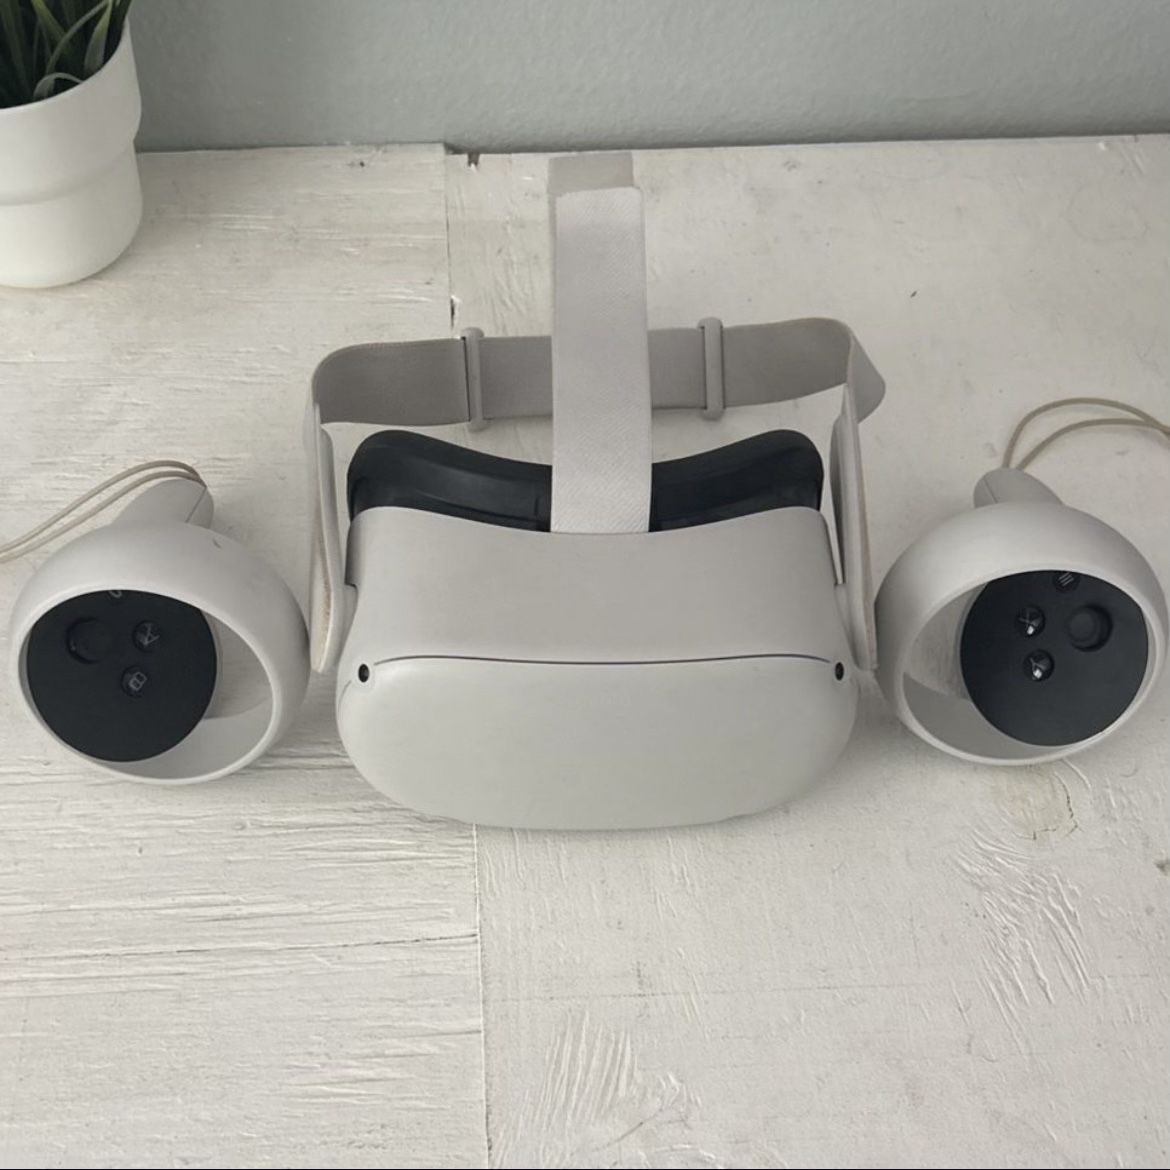 Oculus Quest 2 VR Headset (good condition)